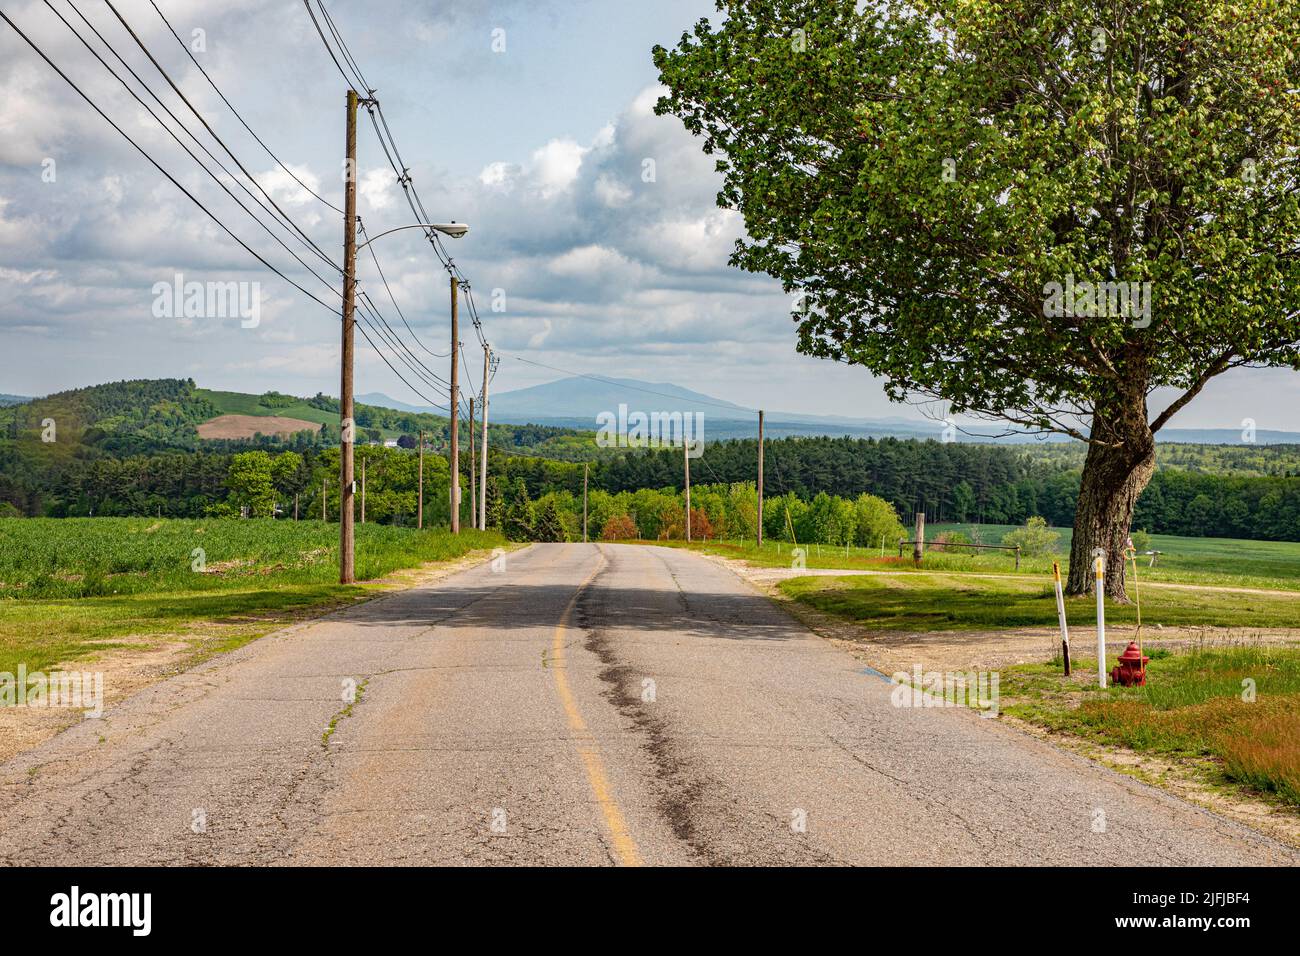 A rural town road  in Templeton, Massachusetts - Mount Monadnock is in the distance Stock Photo